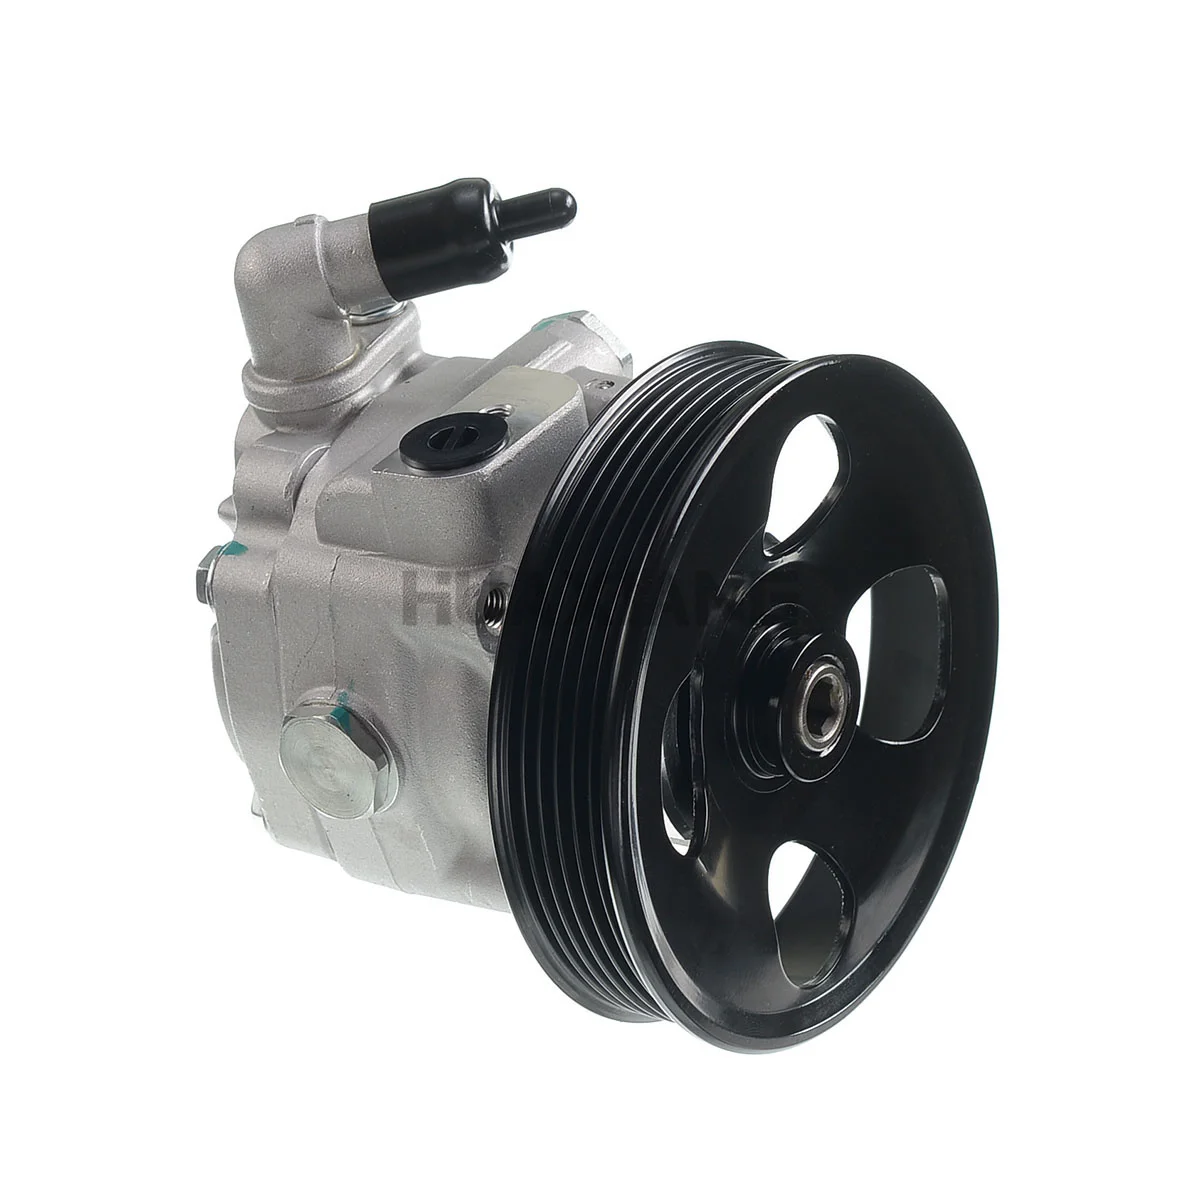 

In-stock CN US CA GMR Power Steering Pump with Pulley for Volvo XC90 V8 4.4L 2005-2011 36000748 21-207 36000899